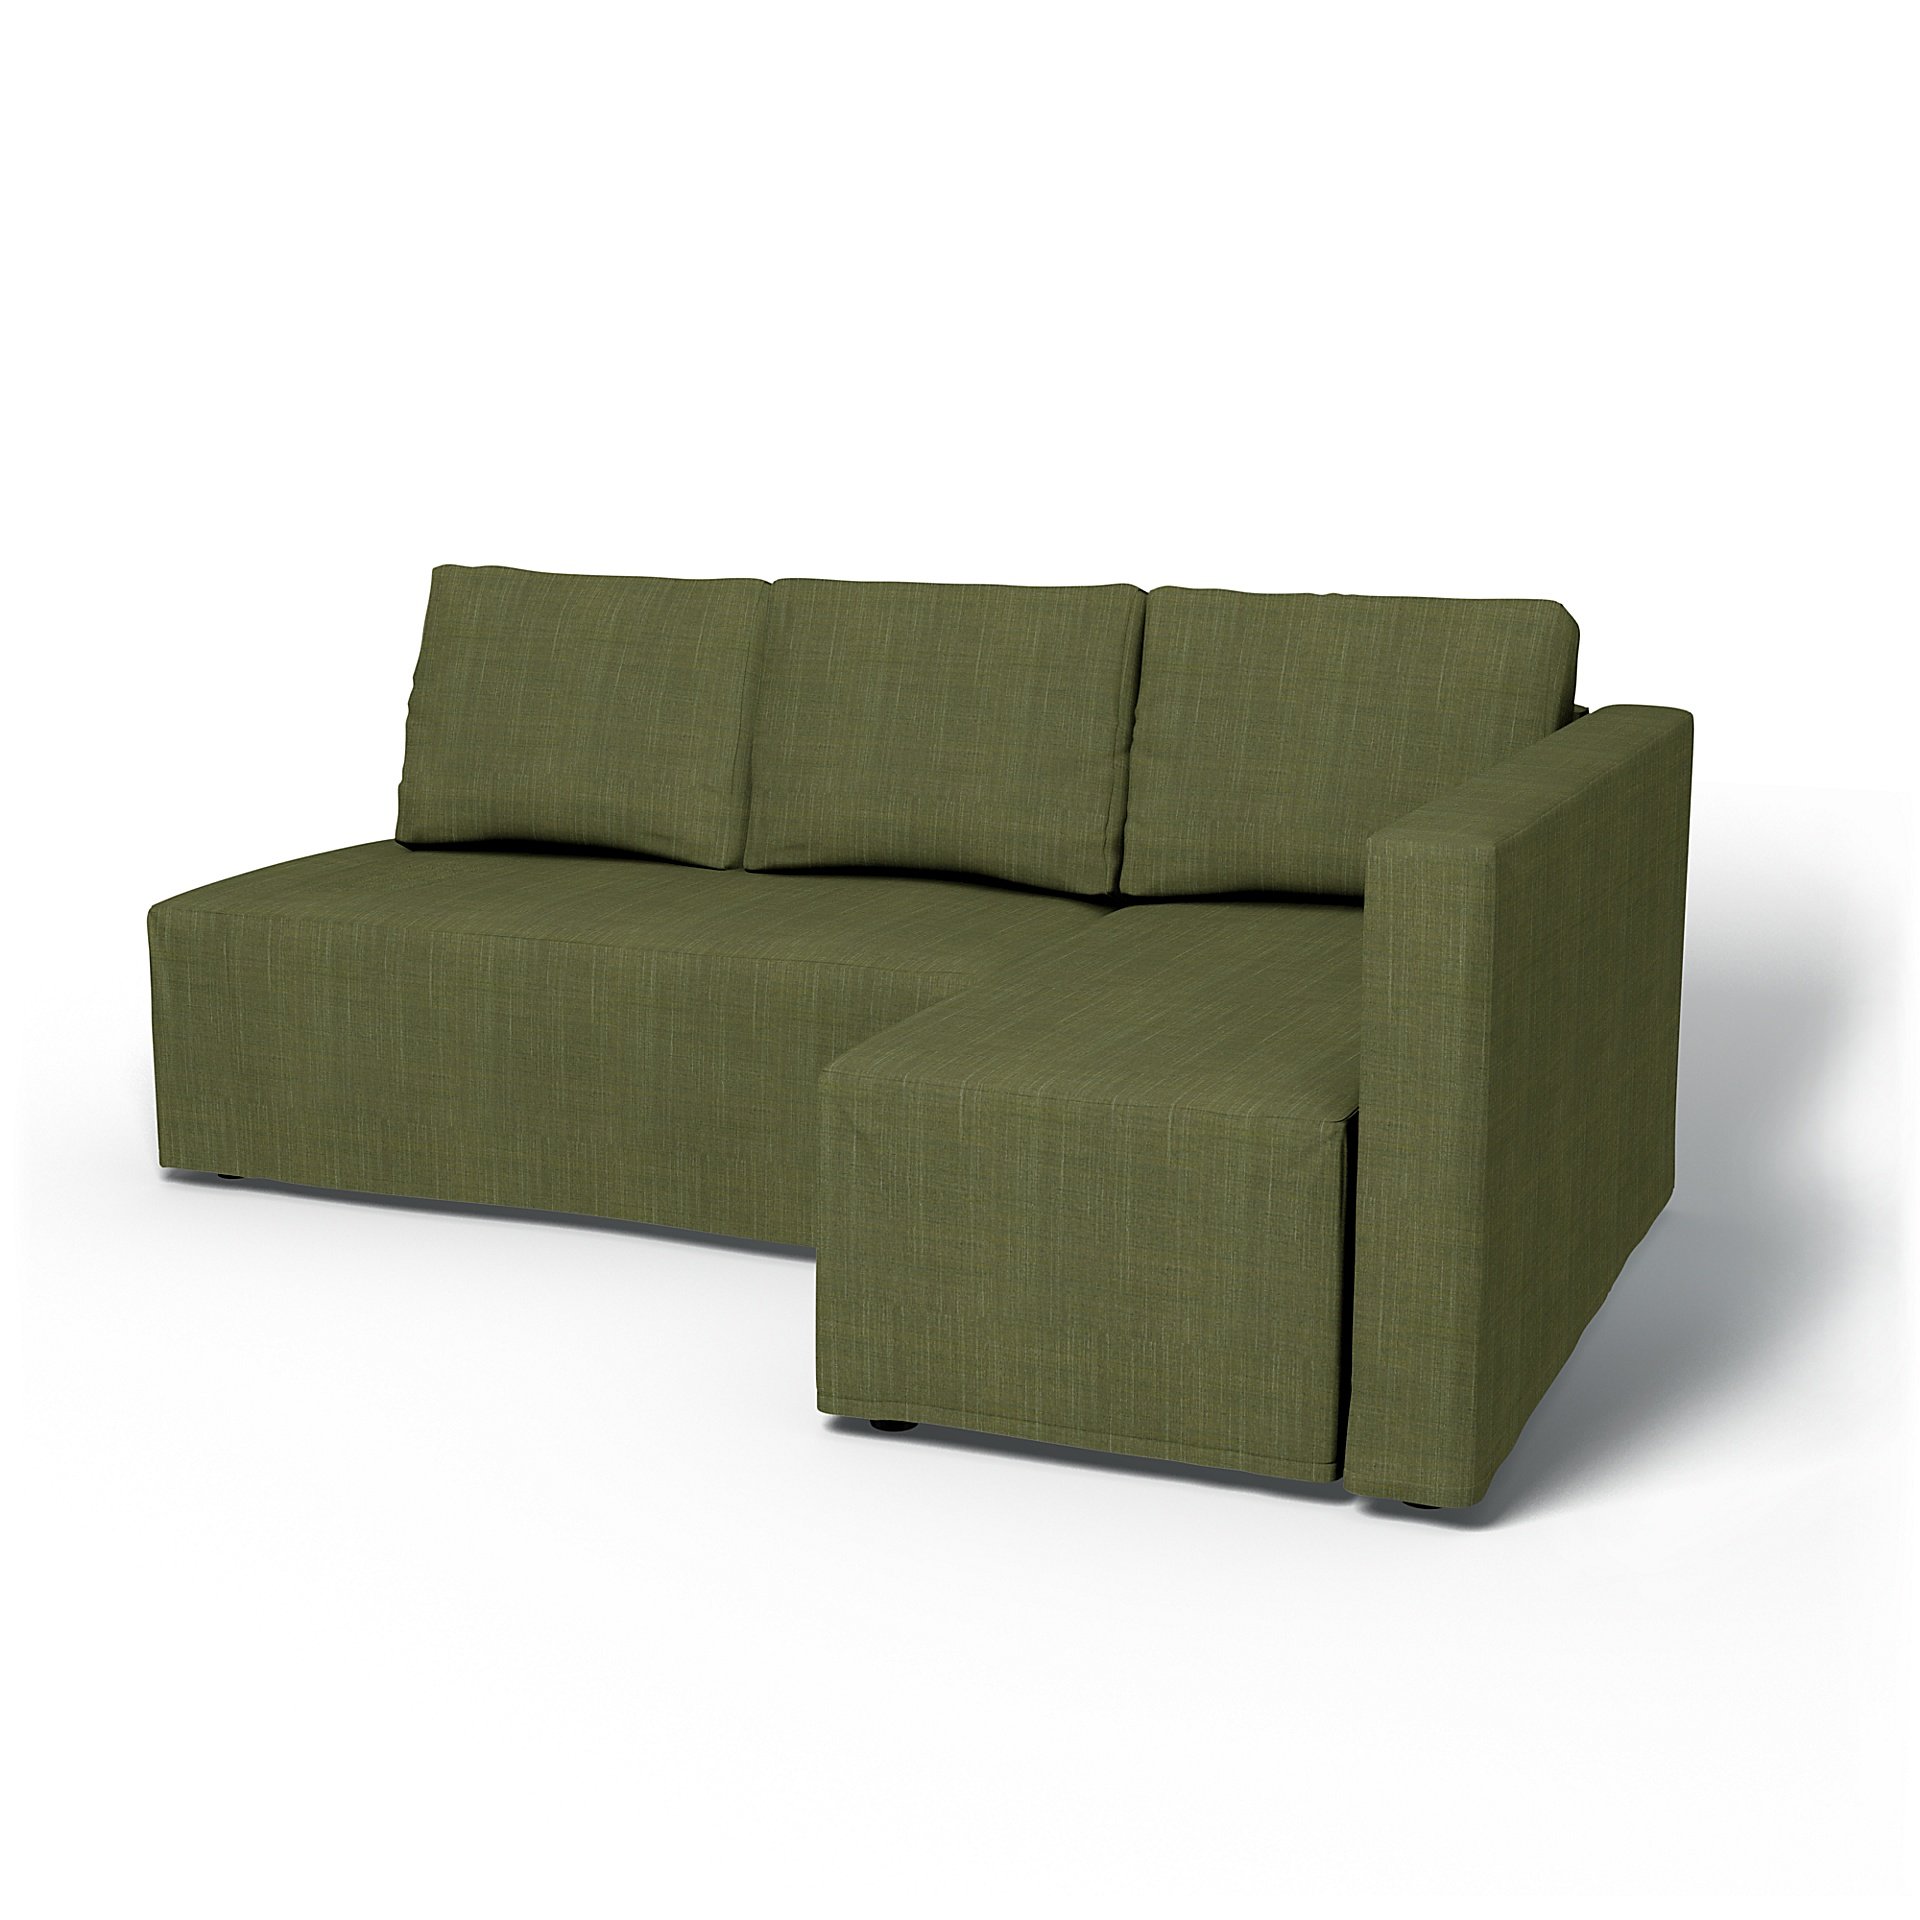 IKEA - Friheten Sofa Bed with Right Chaise Cover, Moss Green, Boucle & Texture - Bemz